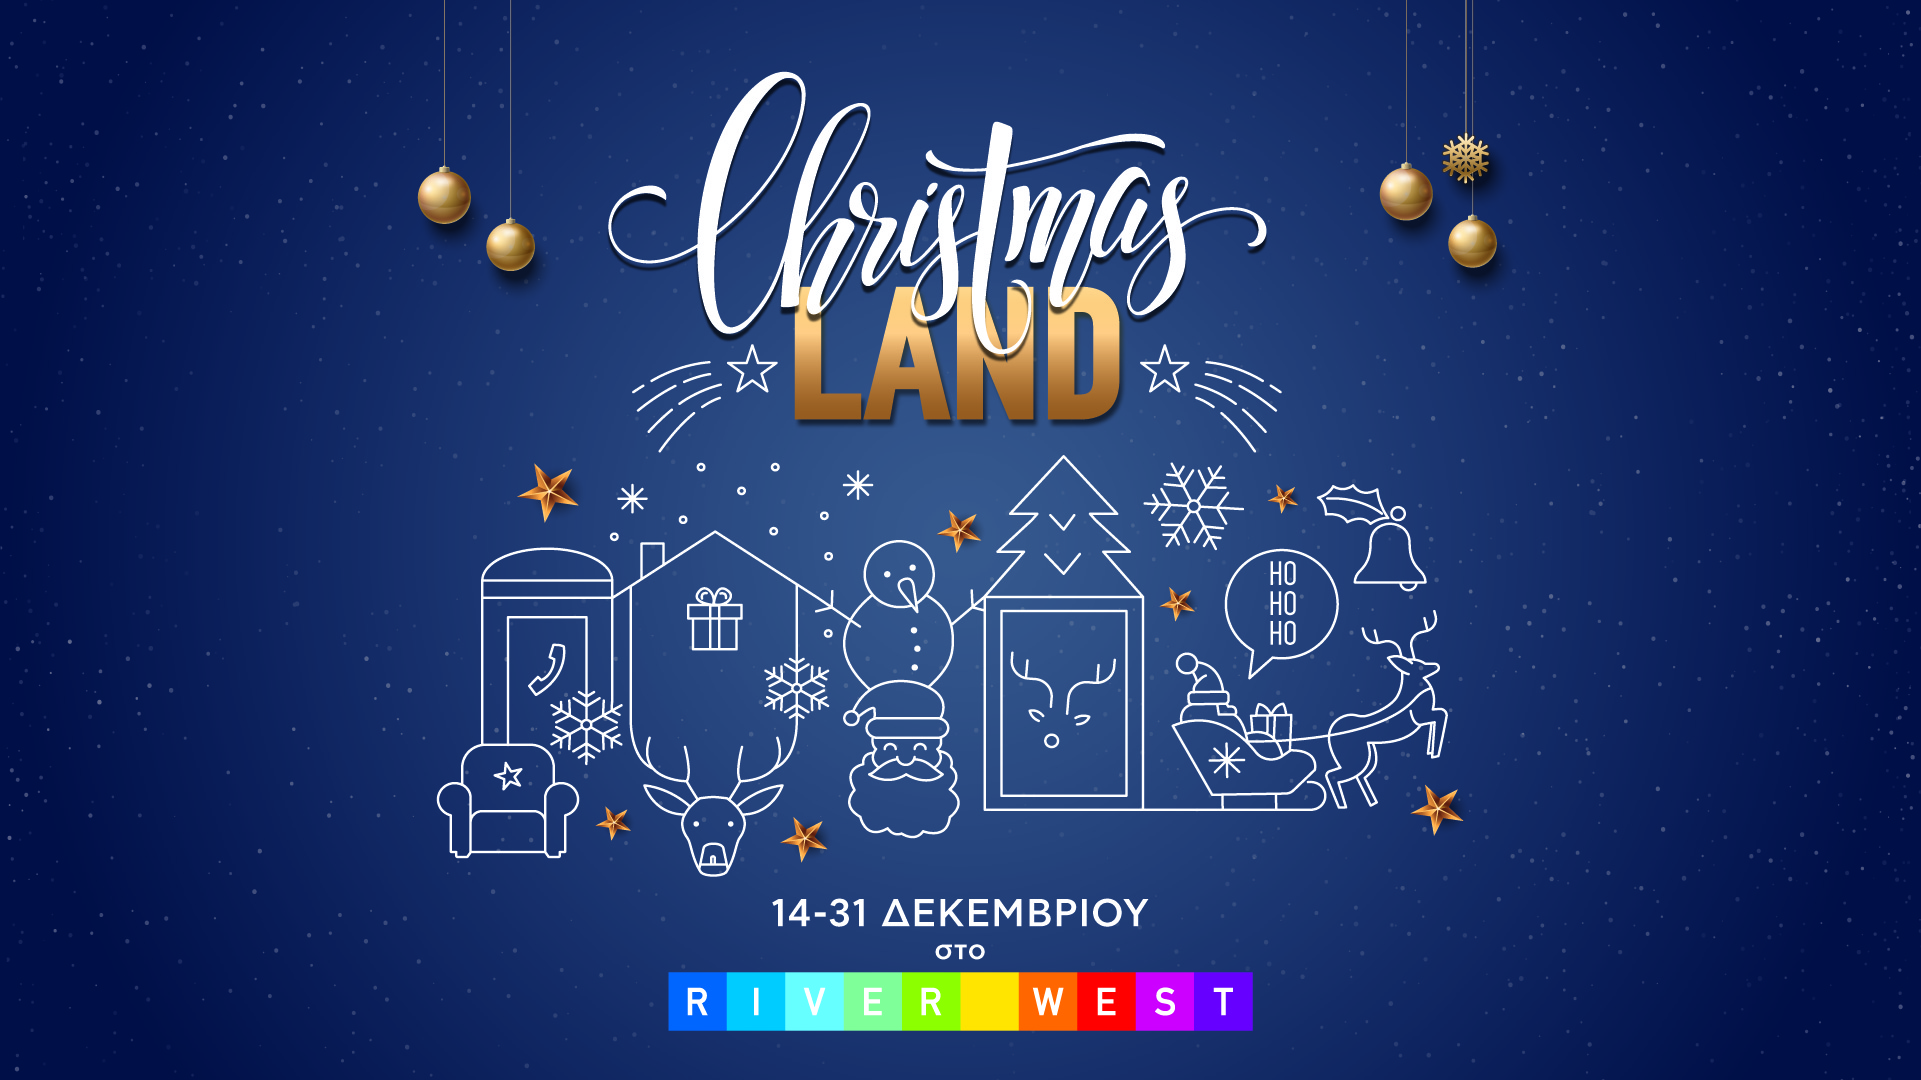 RW_CHRISTMAS LAND_Site Front page 1920x1080px